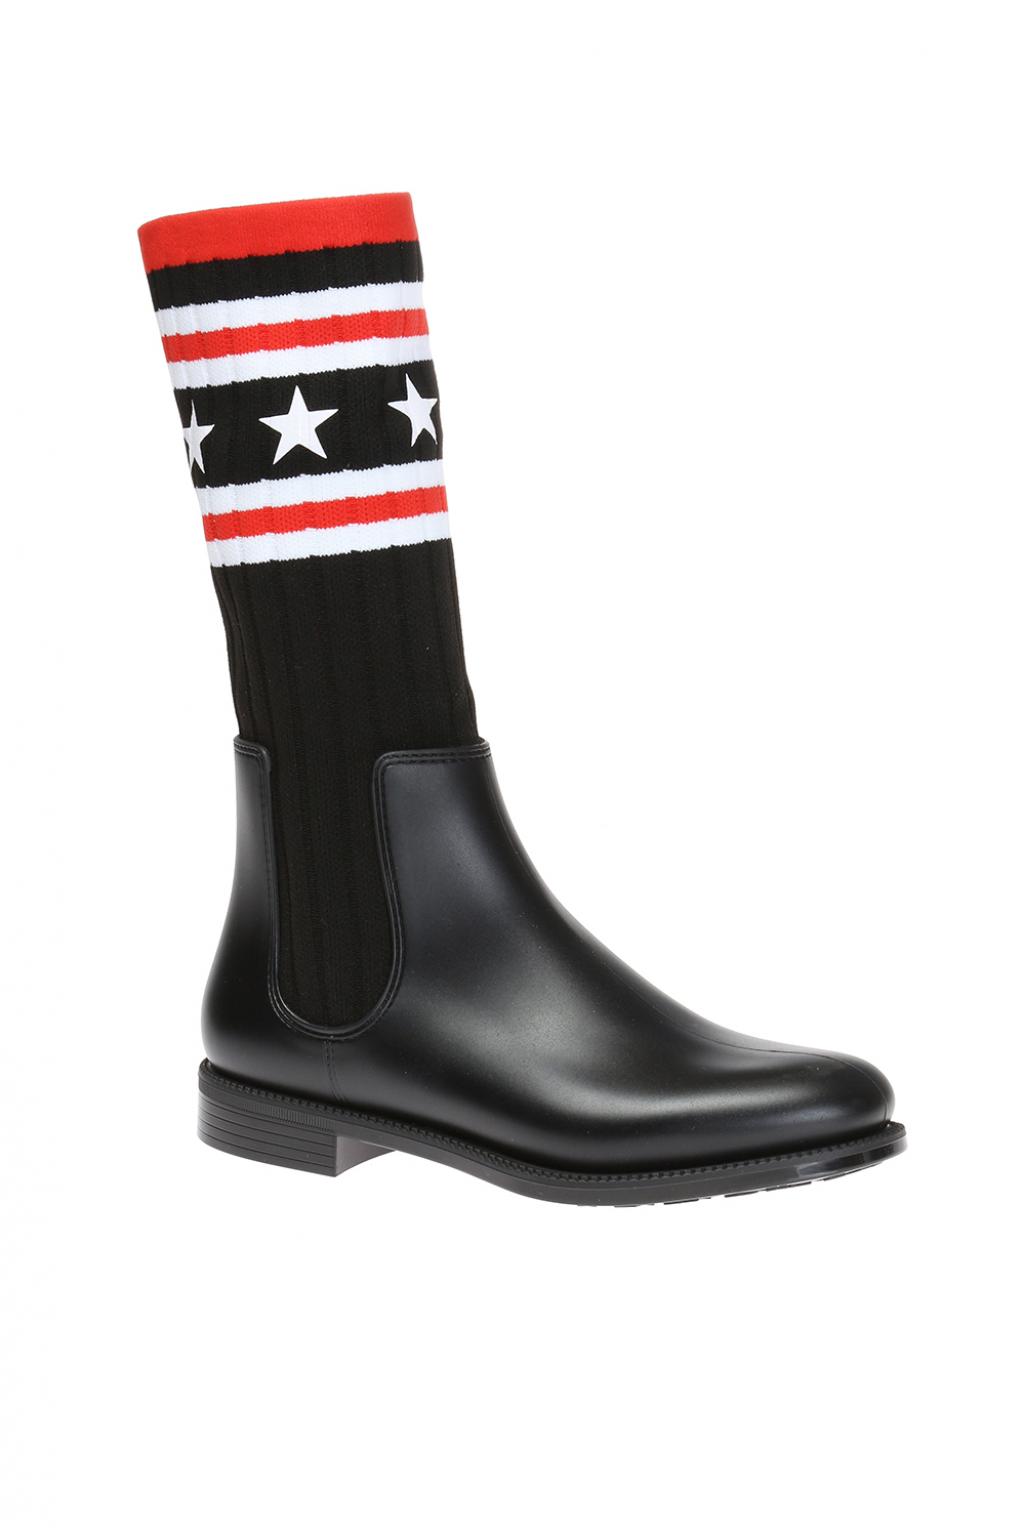 givenchy boots sock